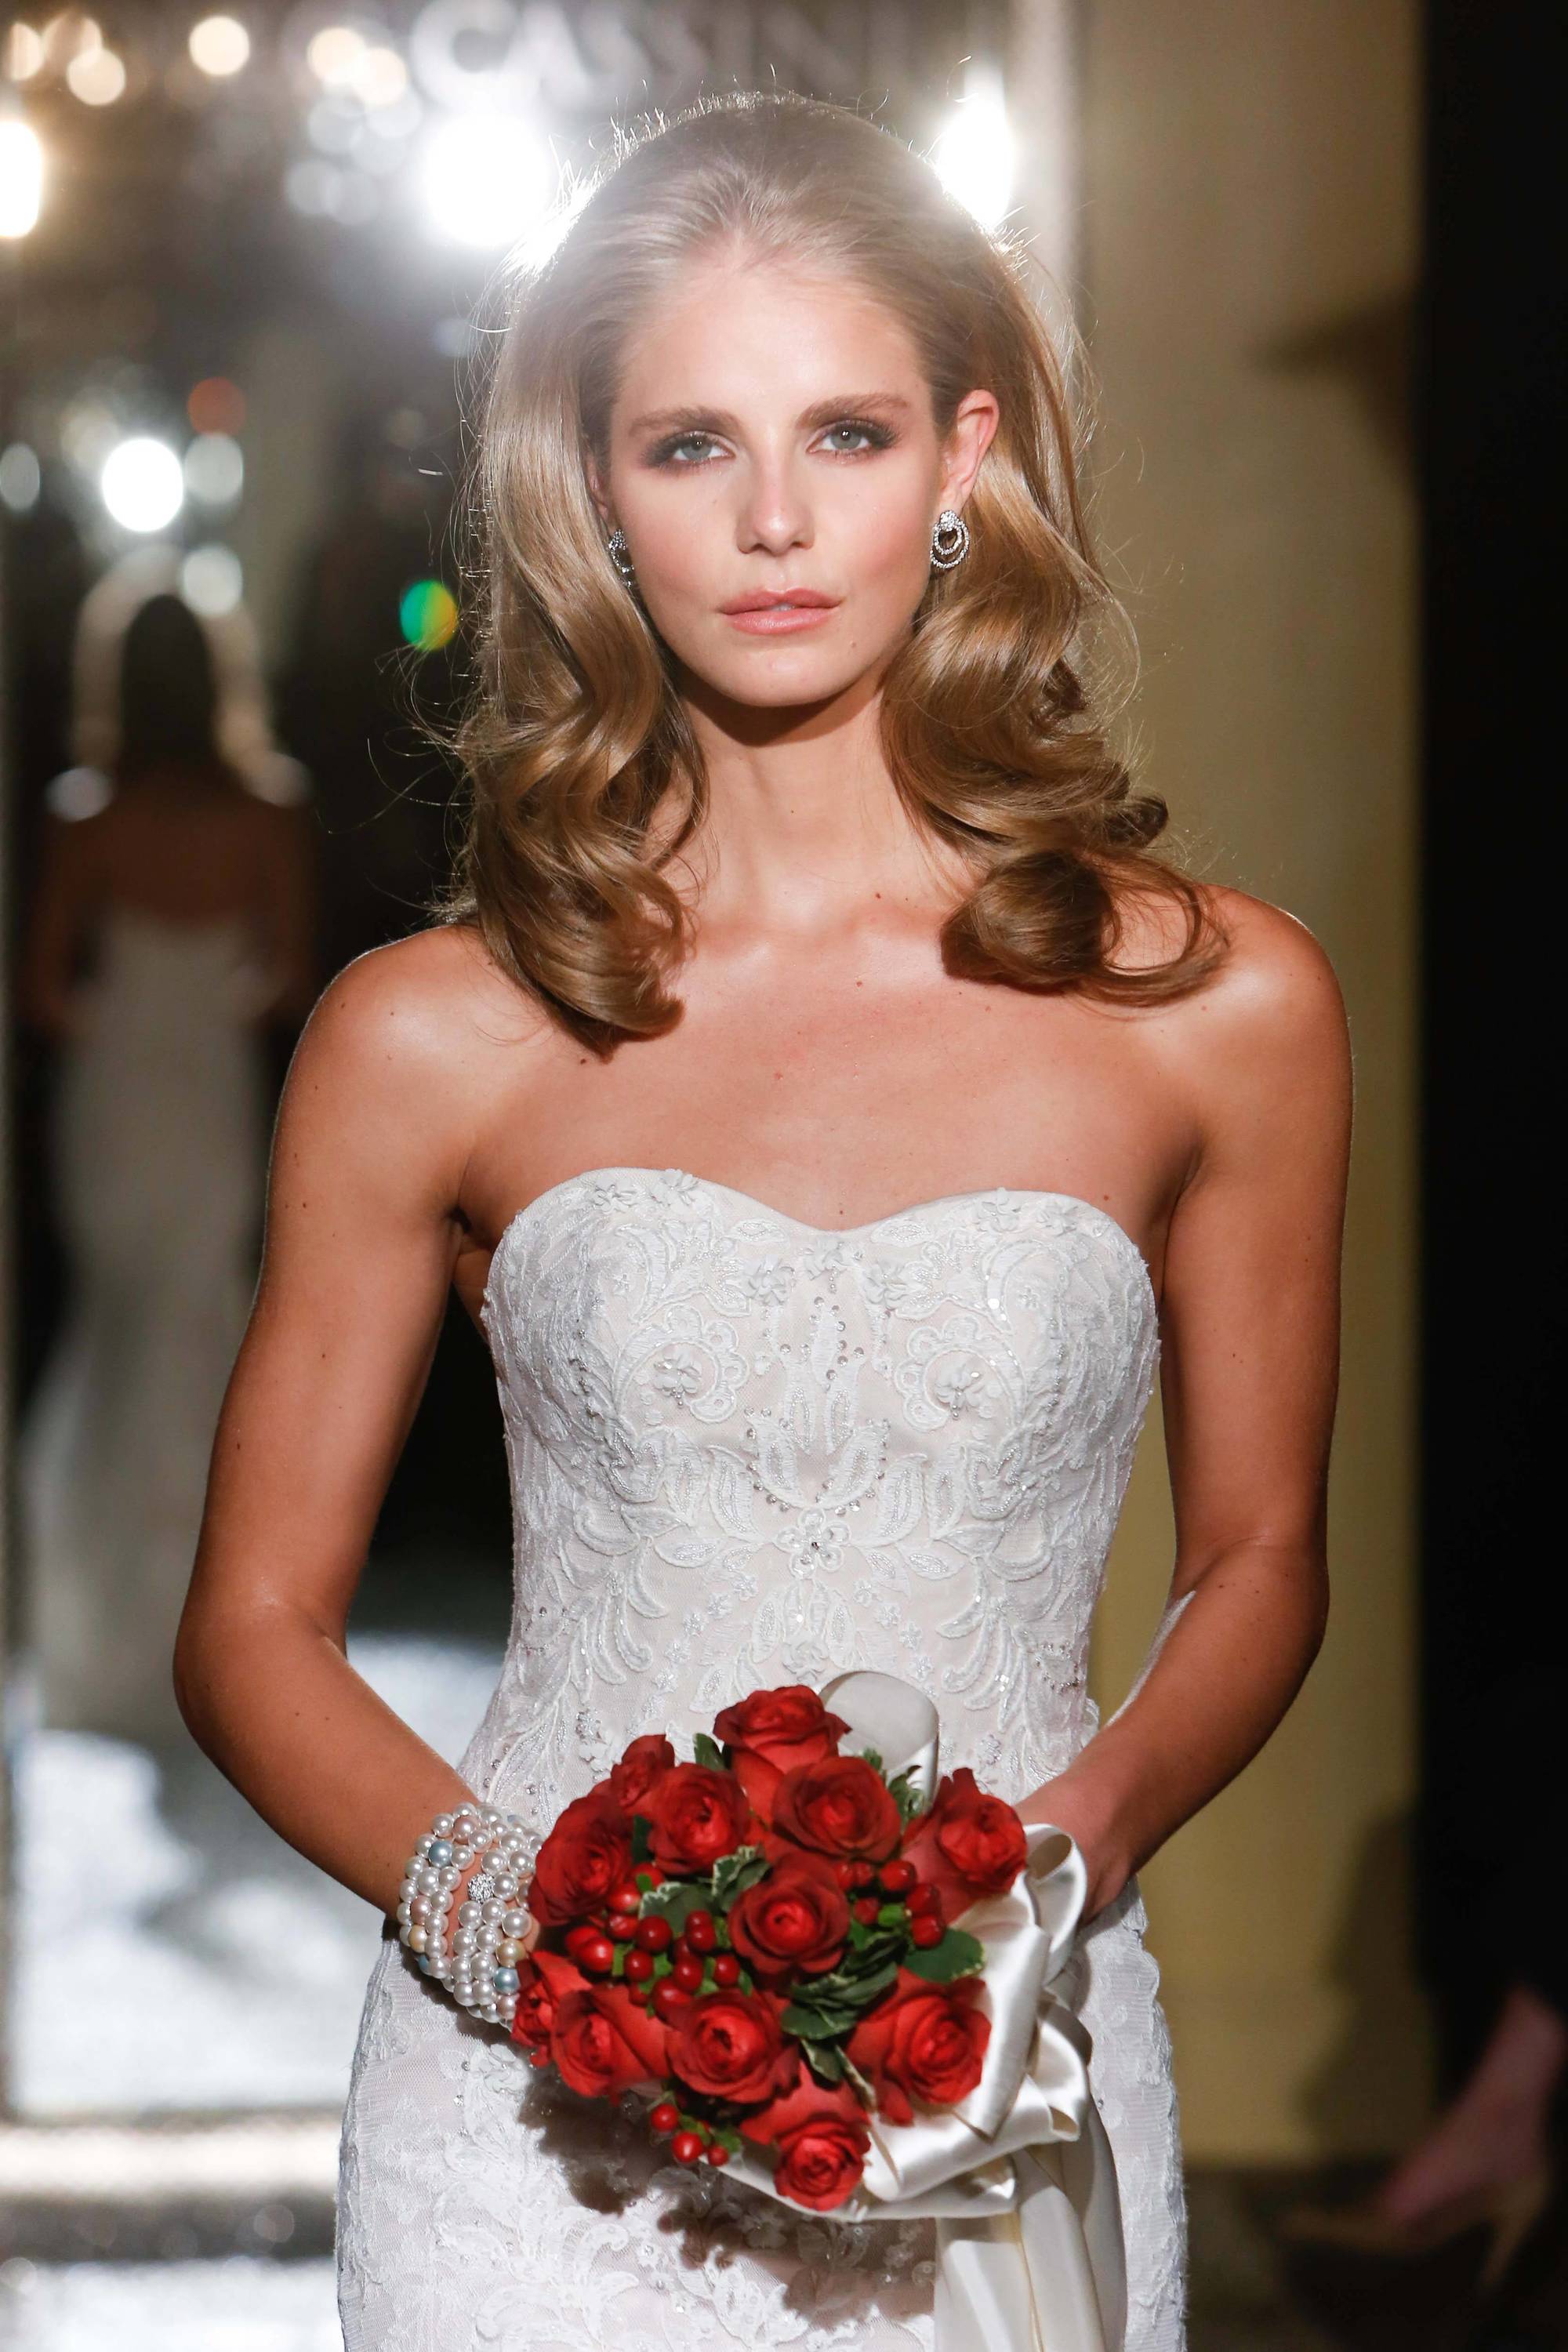 40 Easy Wedding Hairstyles for a Simple Bridal Look